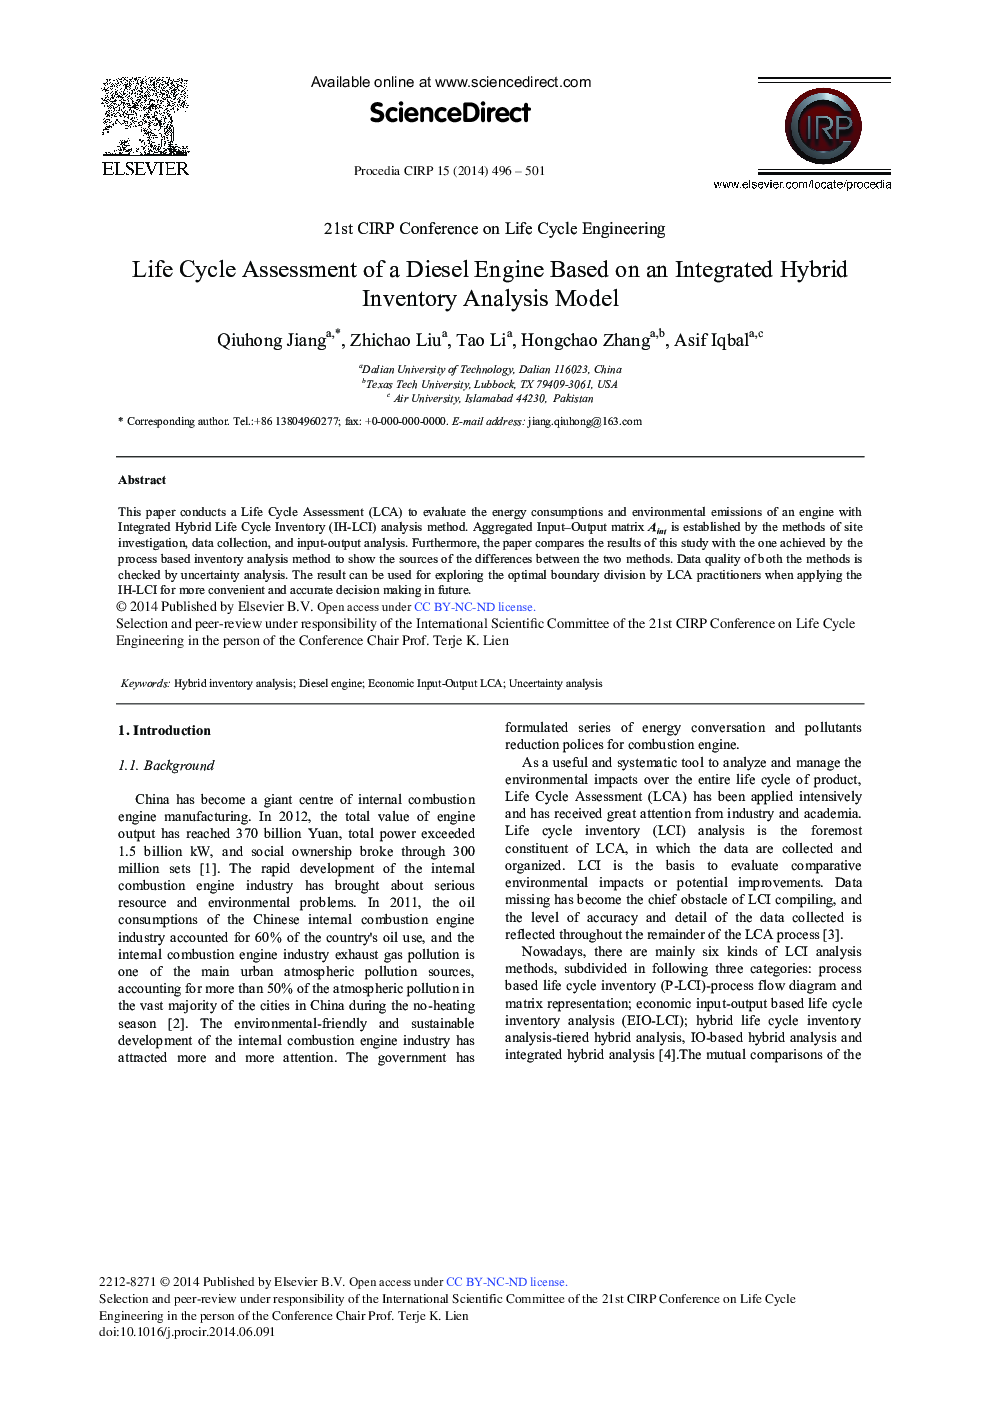 Life Cycle Assessment of a Diesel Engine Based on an Integrated Hybrid Inventory Analysis Model 